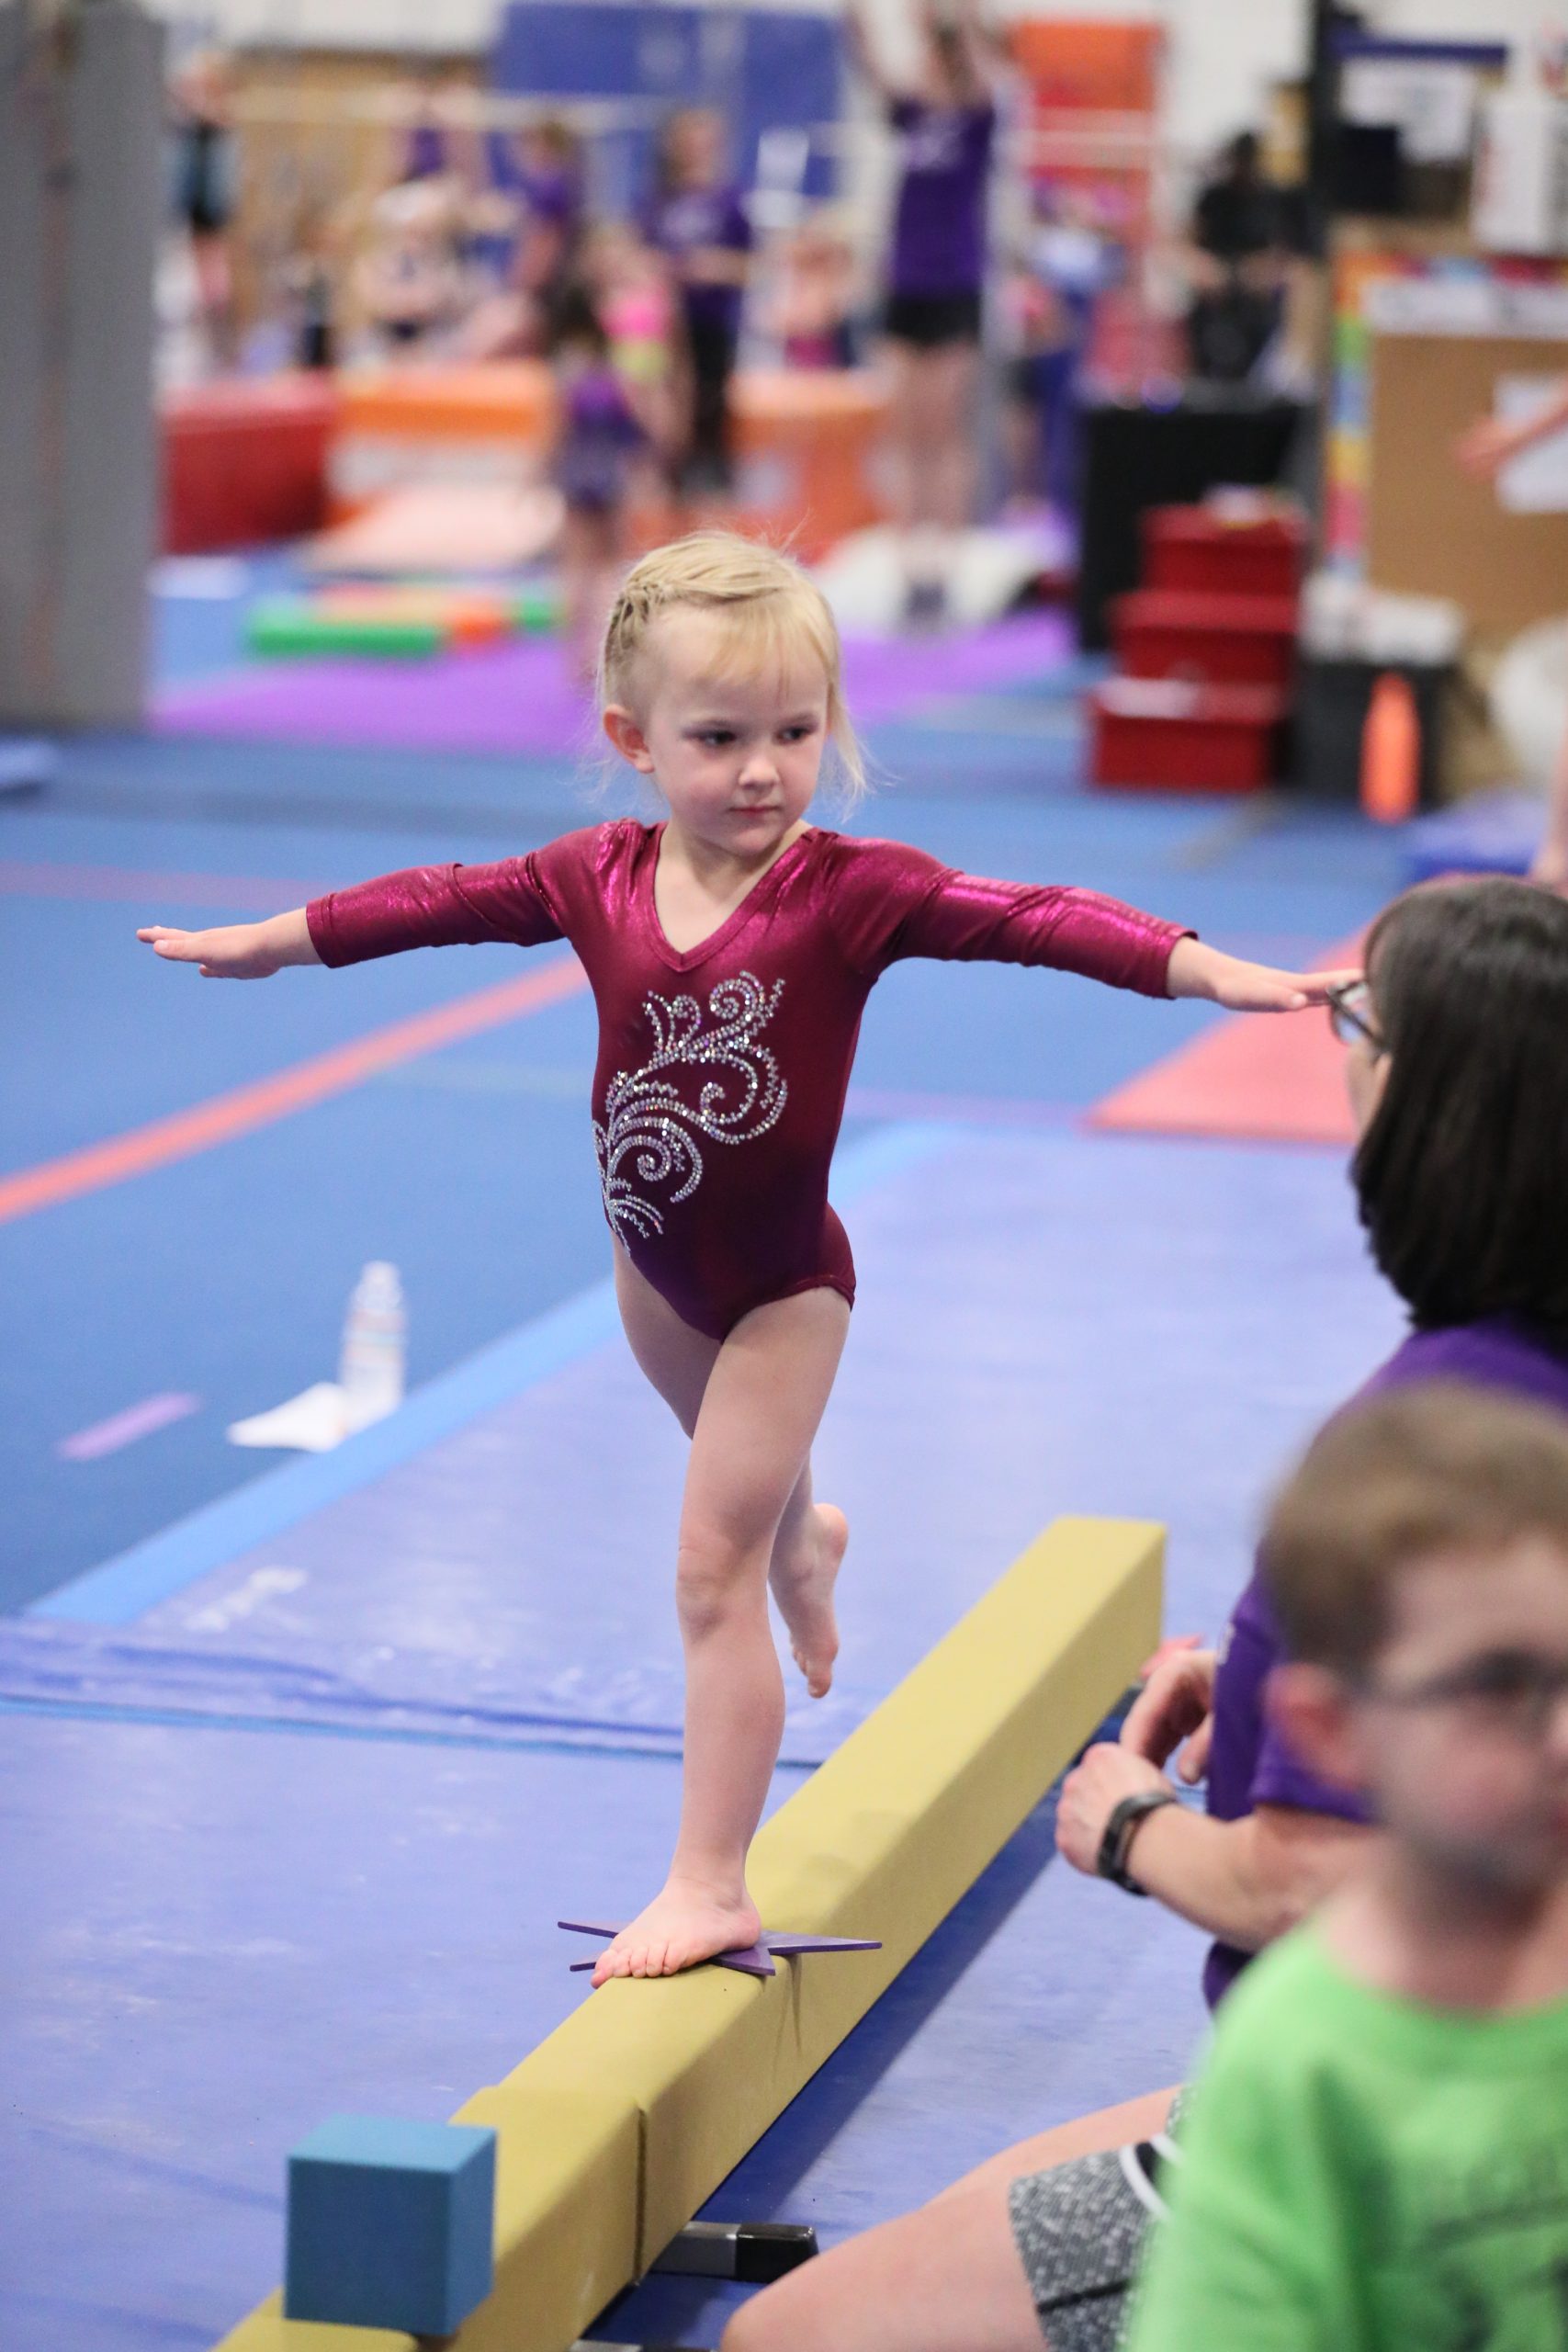 Little Legends Class at Legends Gymnastics in North Andover, MA.